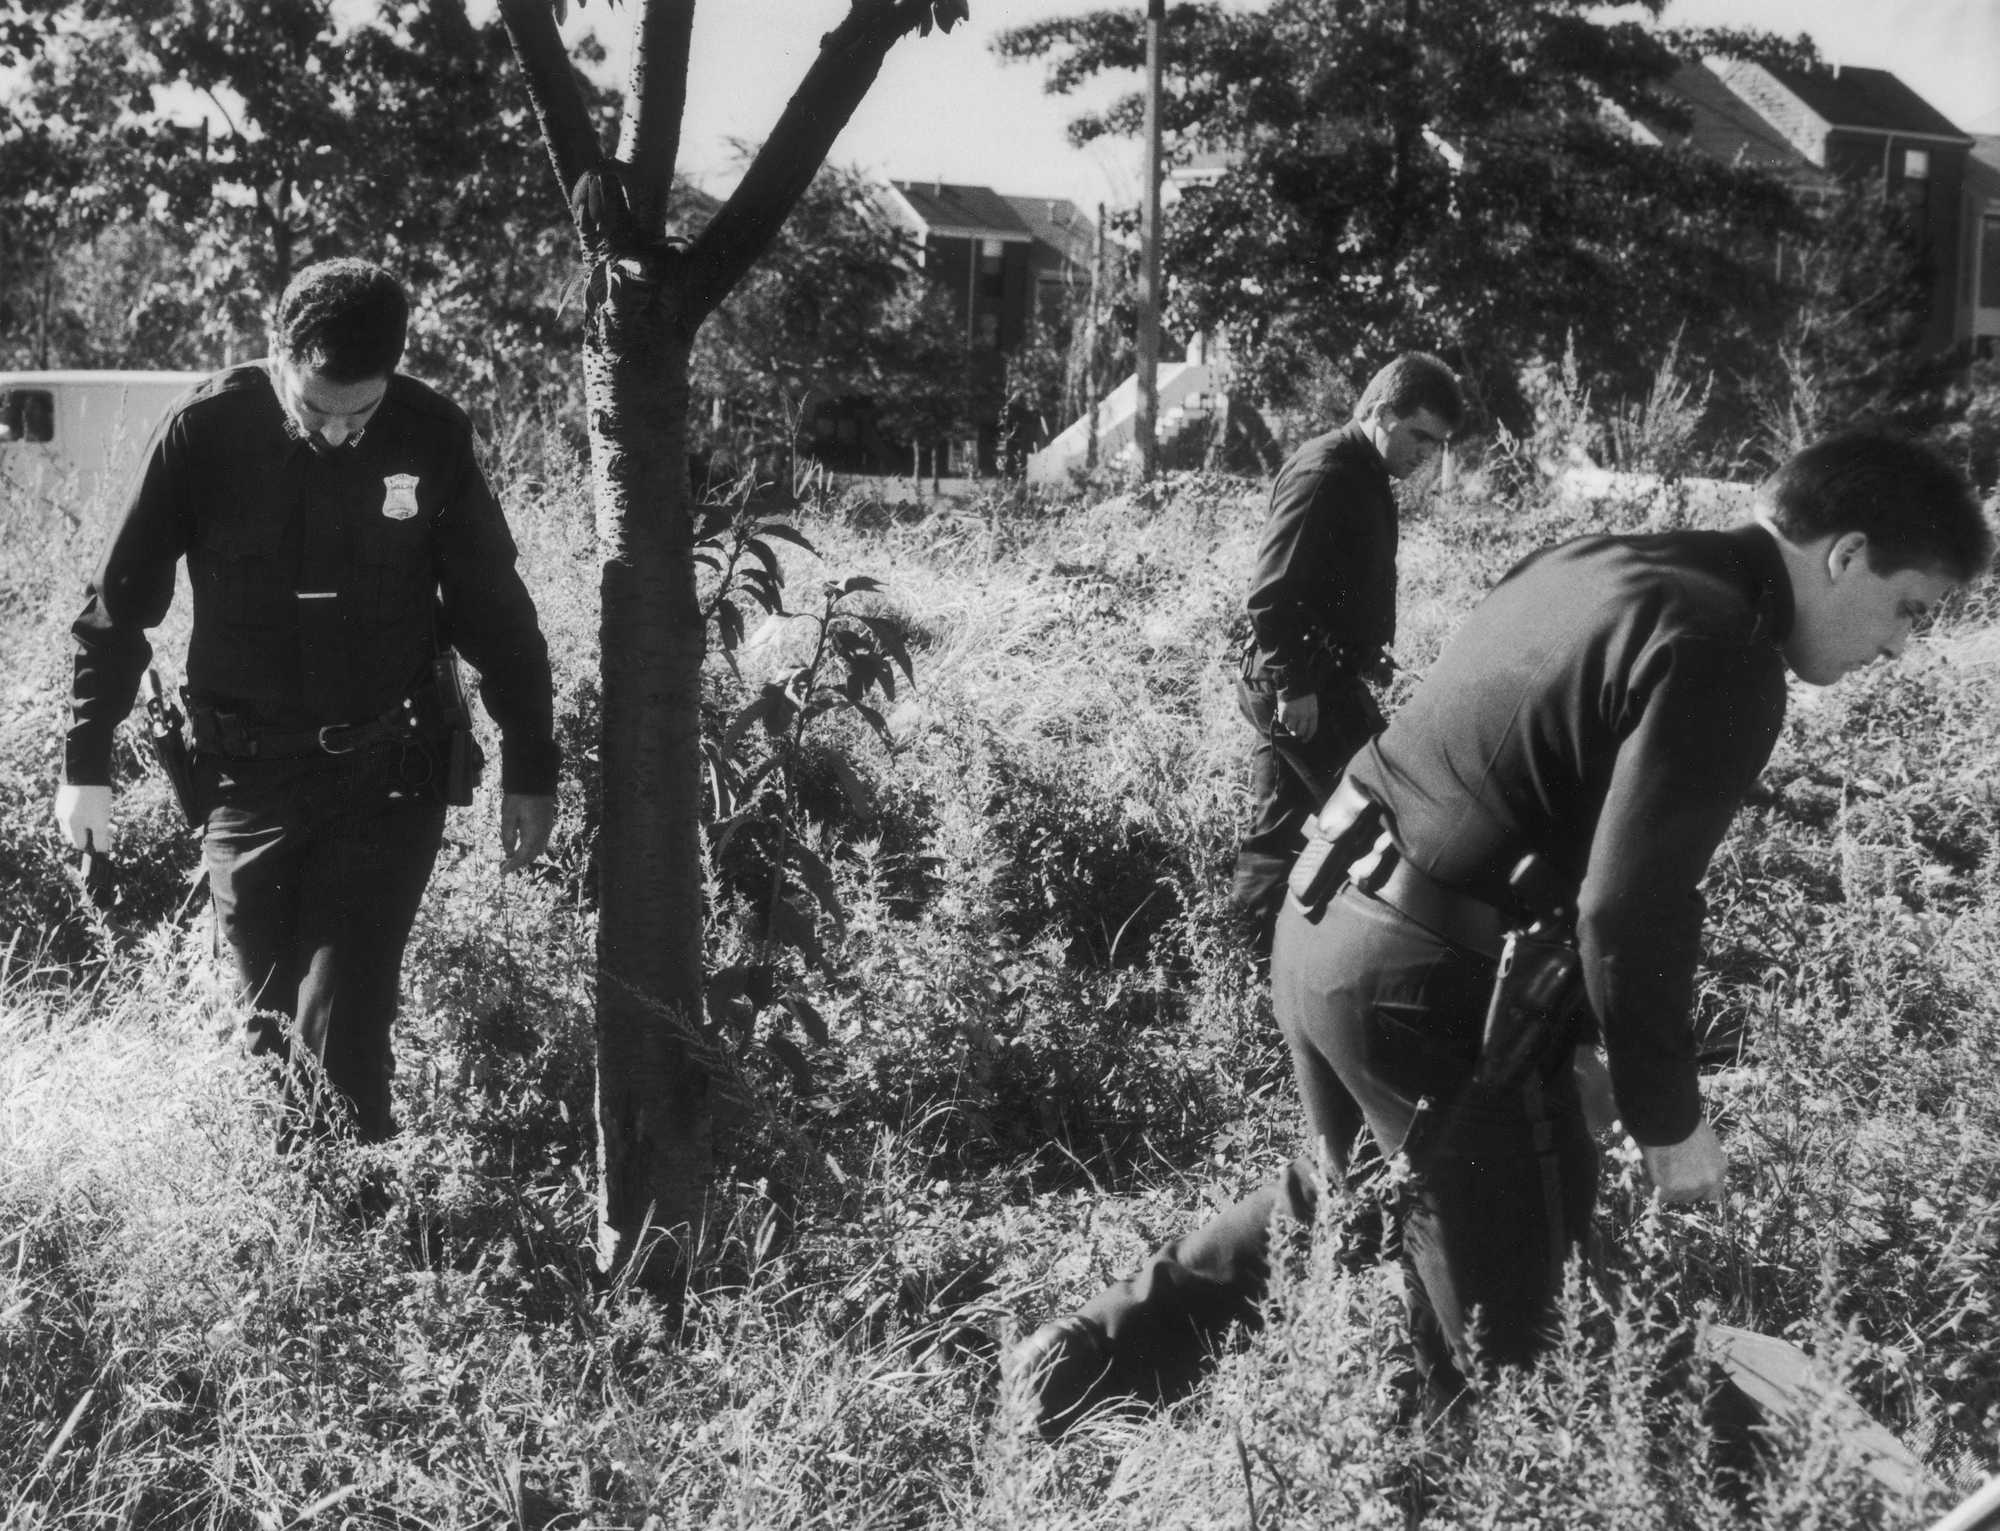 Boston police officers searched a lot along Shawmut Avenue near Melnea Cass Boulevard after they received a tip that two men were seen with a handgun on Oct. 24, 1989. Police said the gun they found was not the same caliber as the one used in the Carol Stuart shooting.